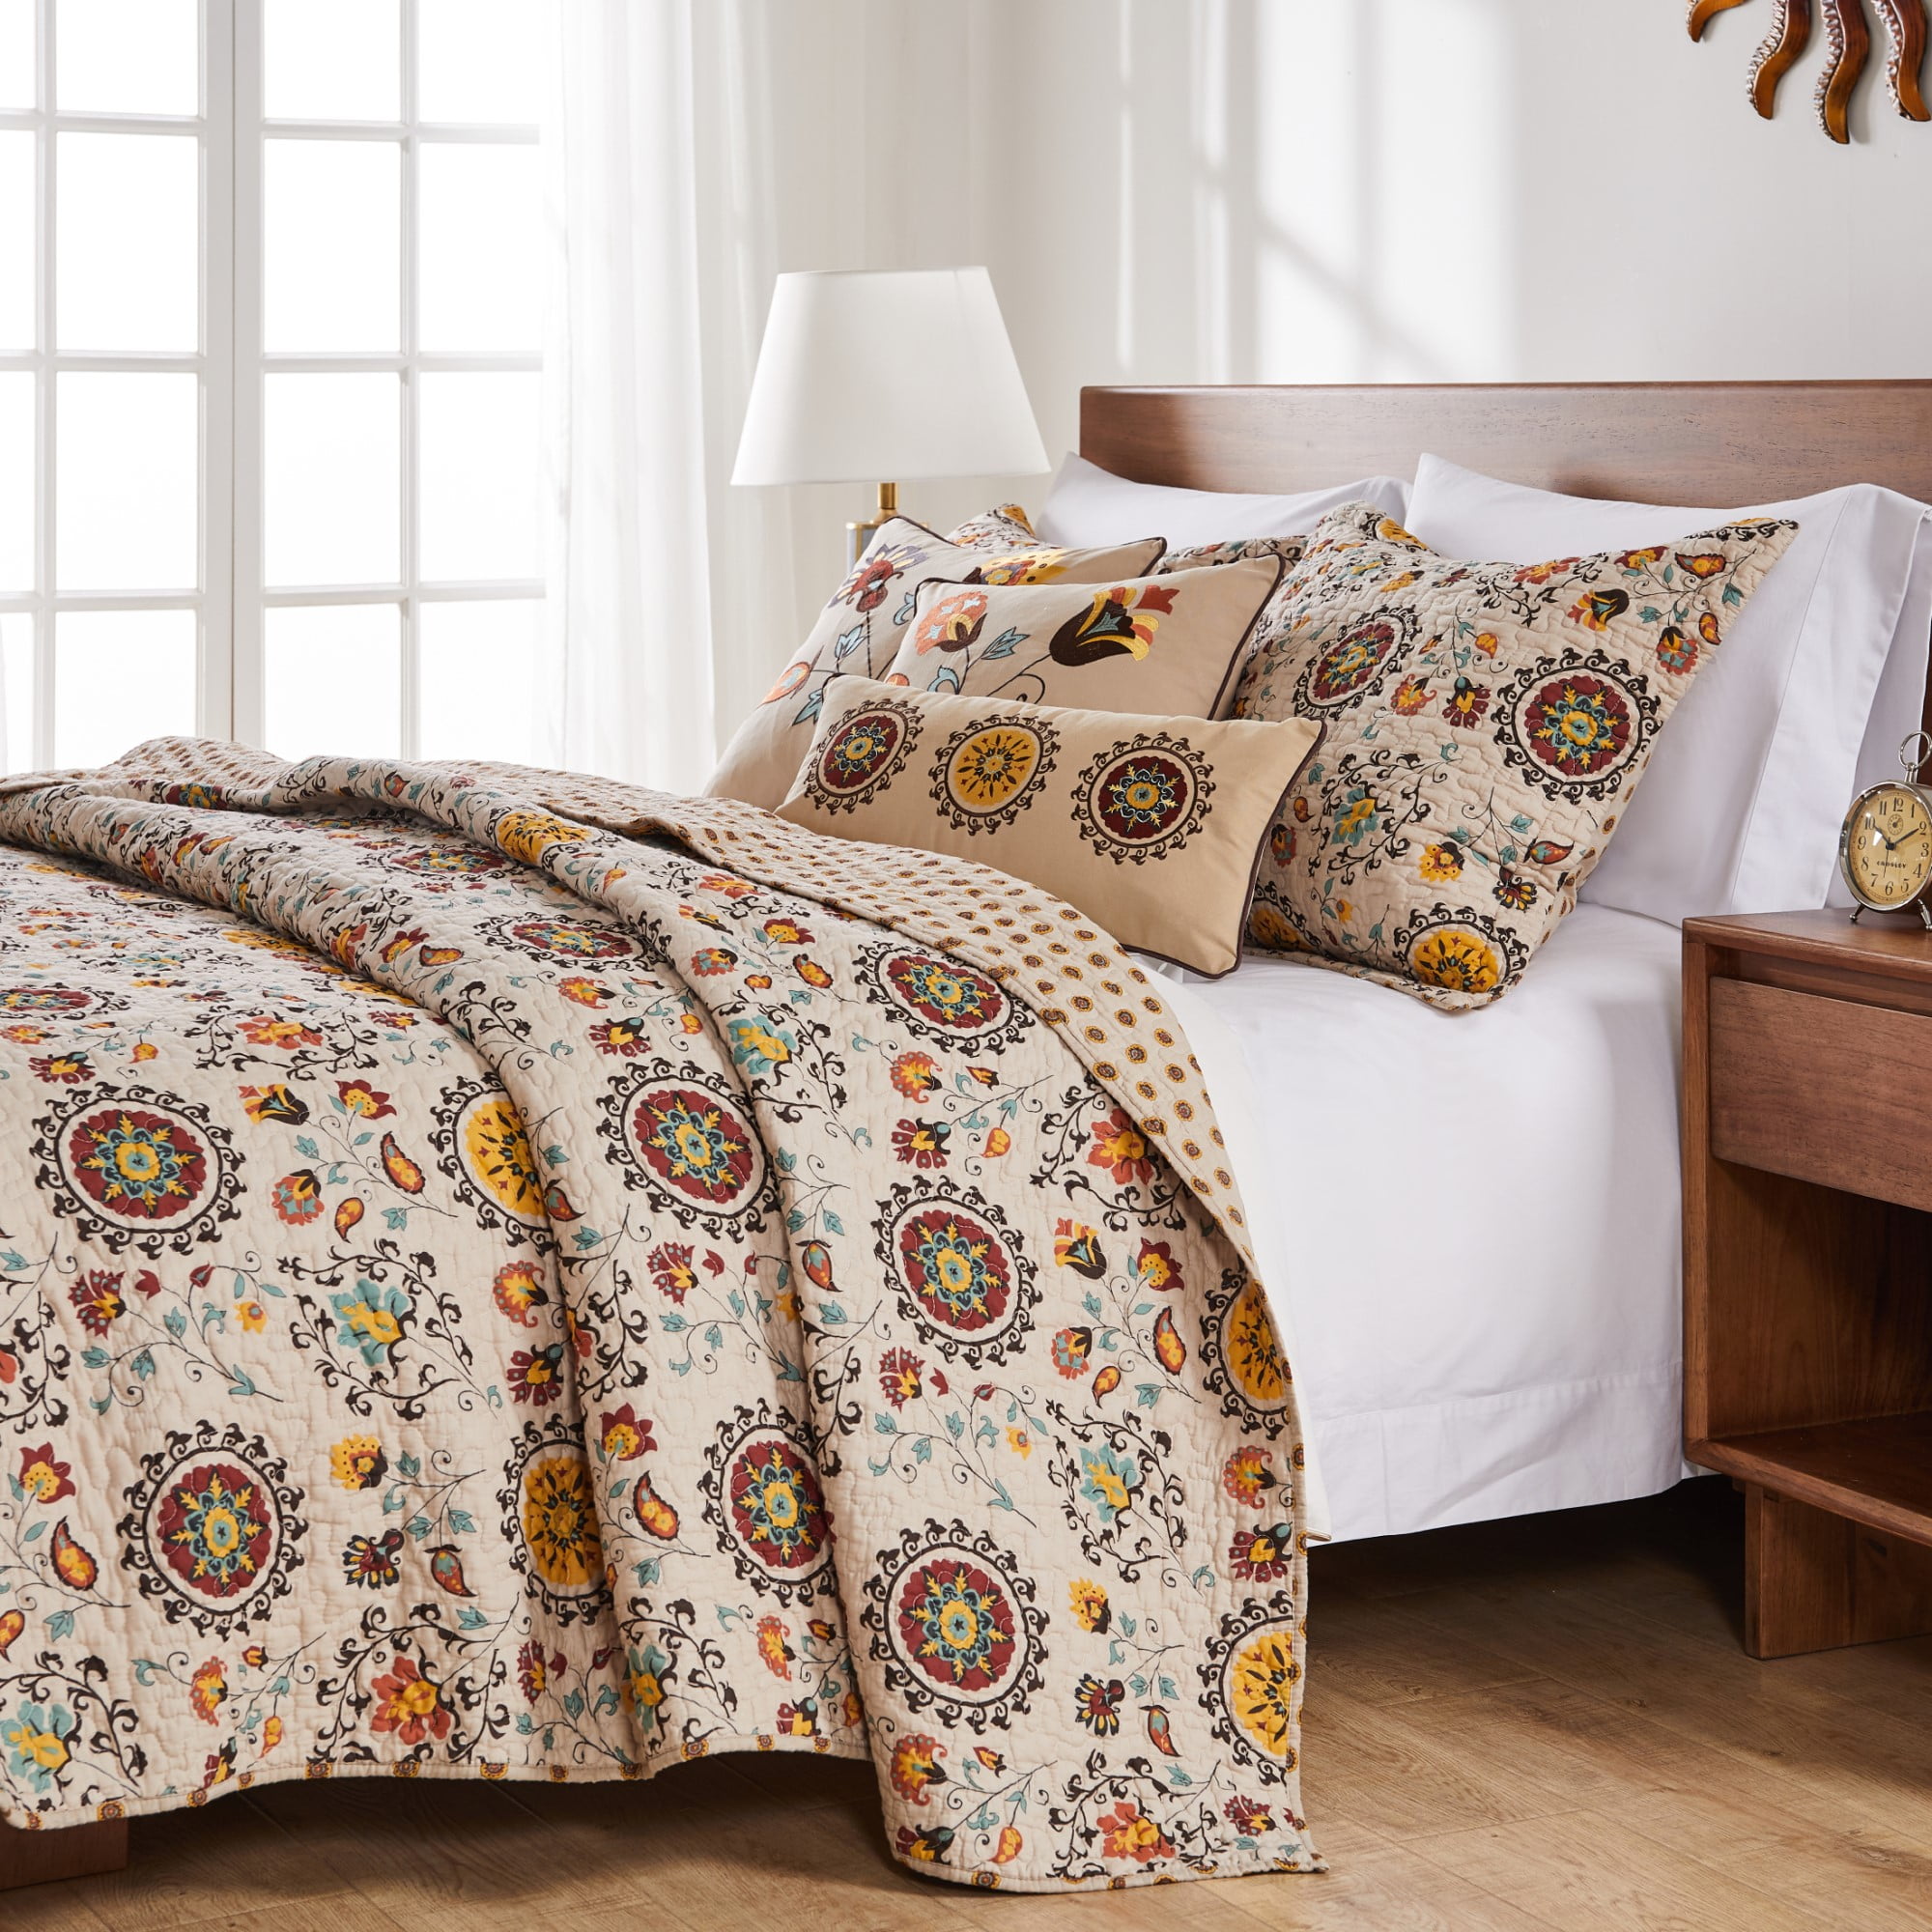 Details about   Handmade Suzani Bed Cover Throw Vintage Cotton Bedspread Bohemian Bedsheet 